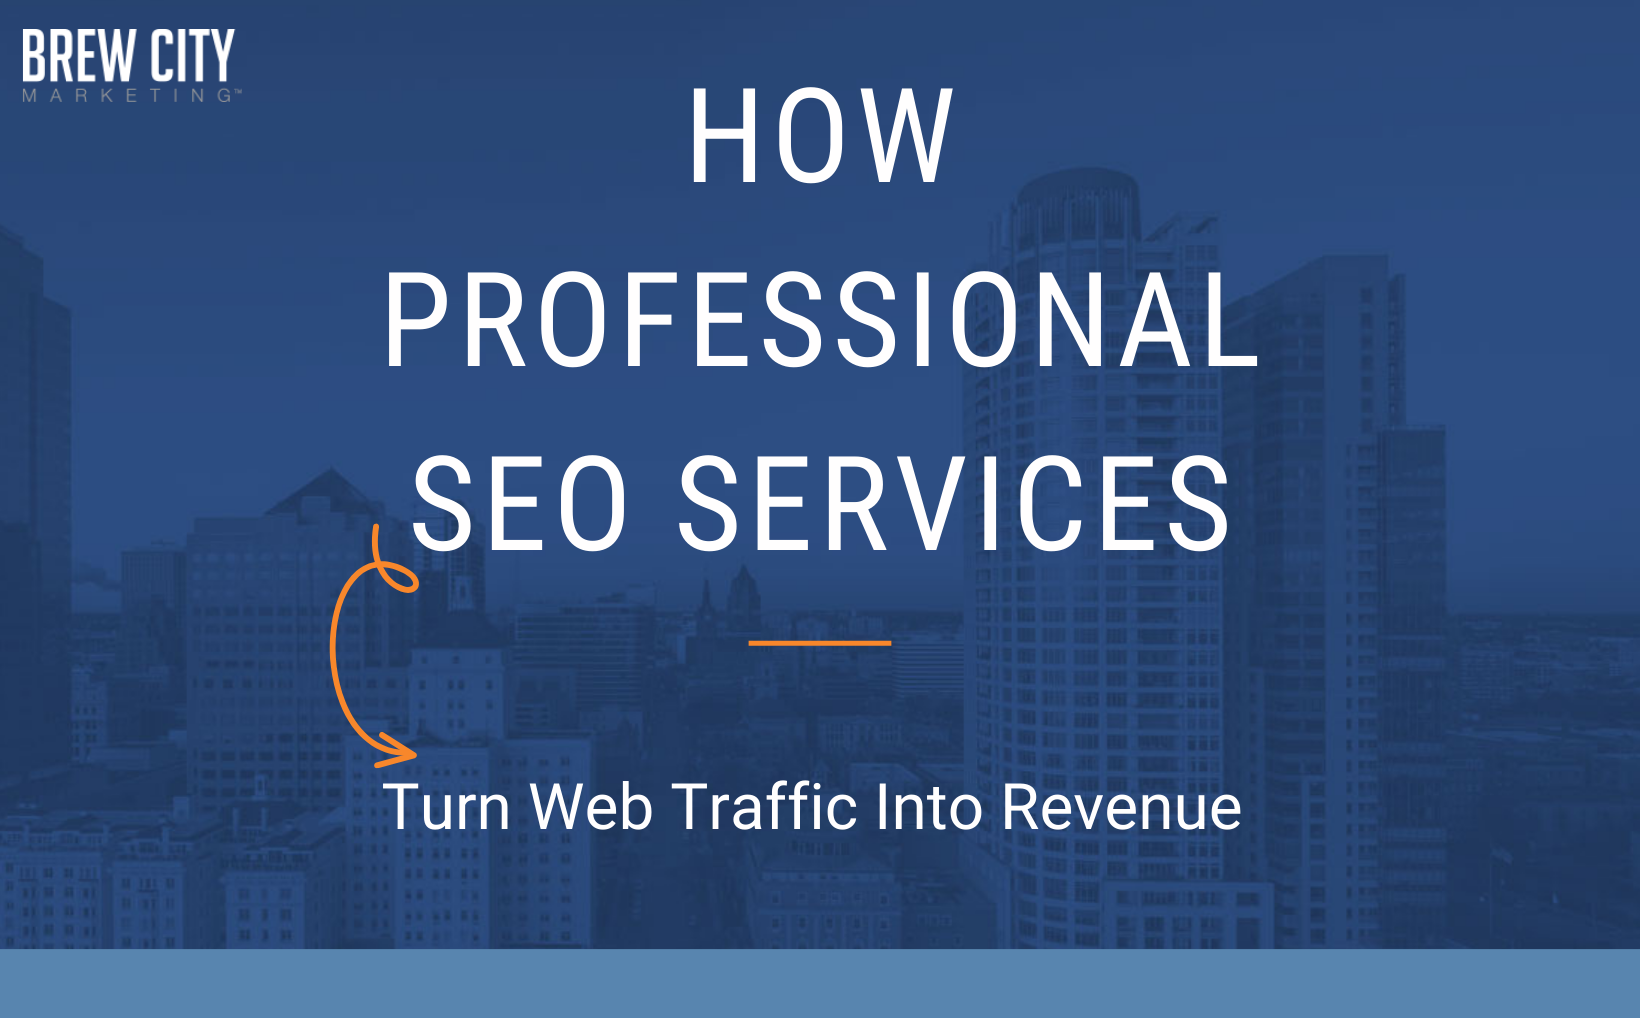 How Professional SEO Services Turn Web Traffic Into Revenue